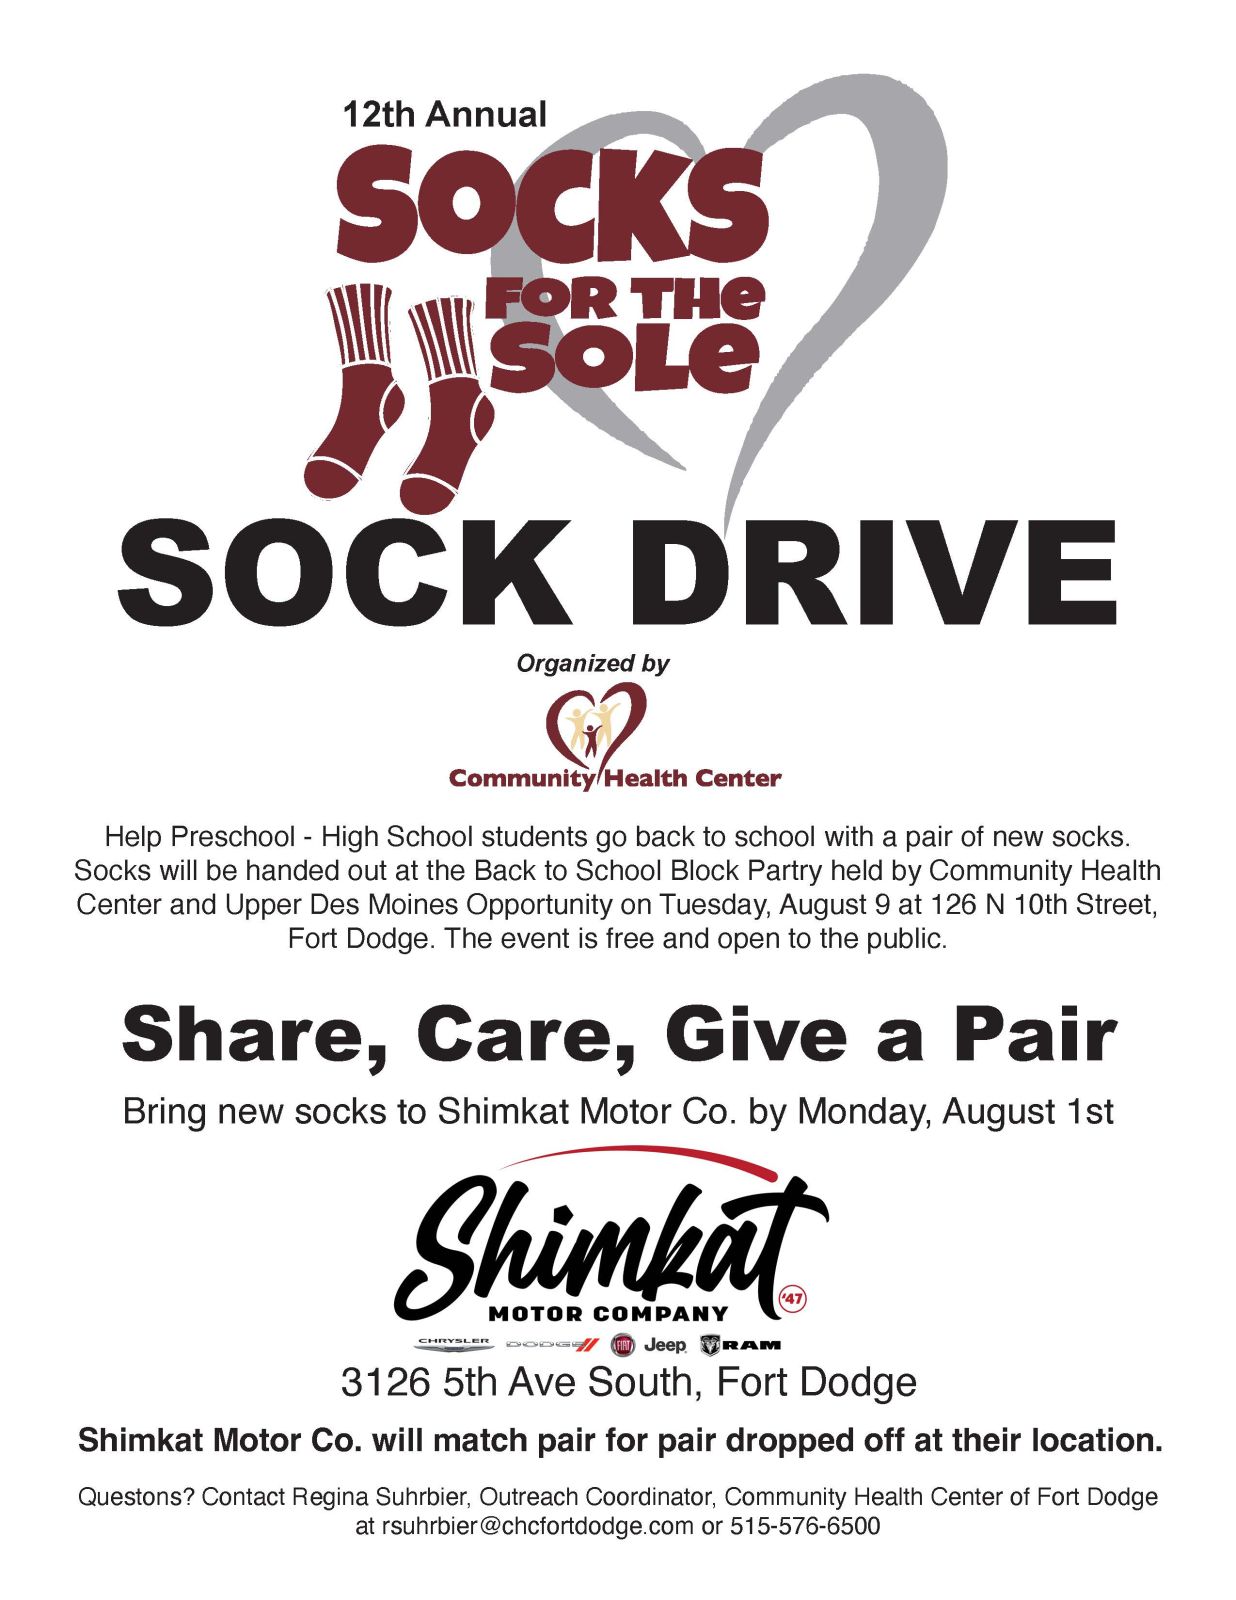 12th annual sock drive is starting Photo